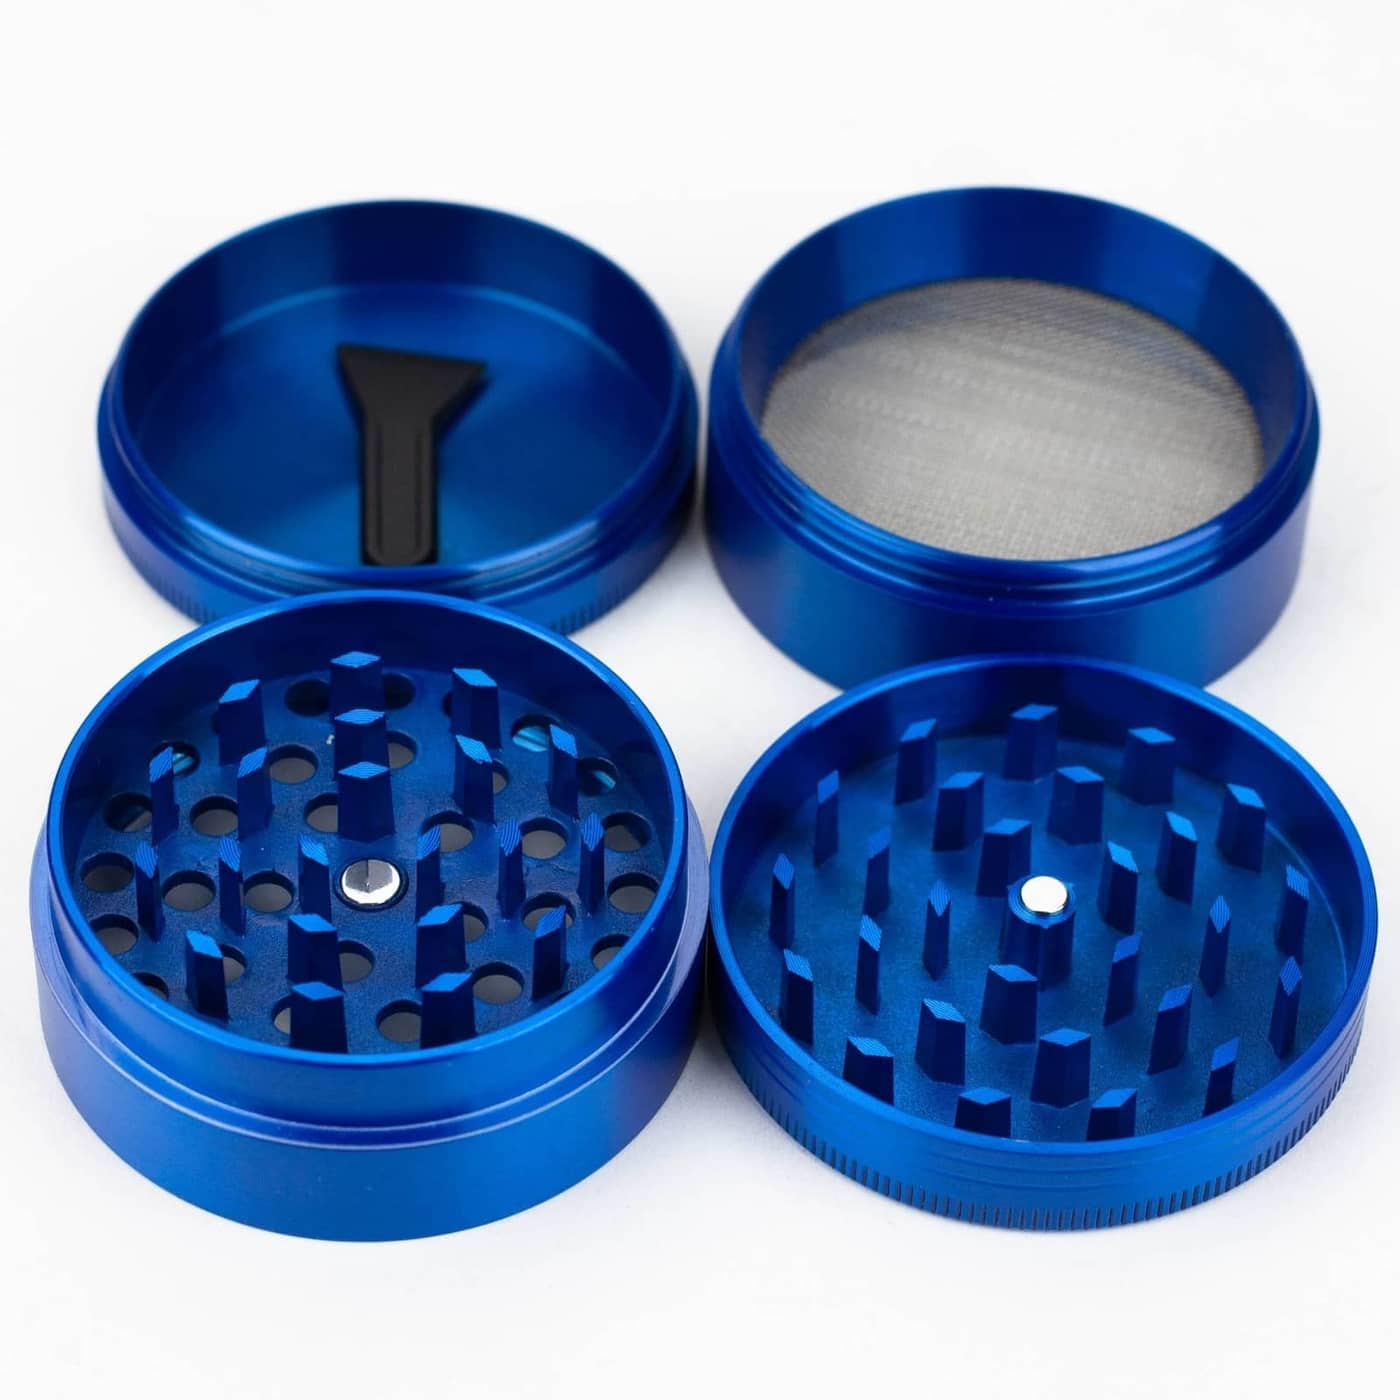 Cheech and Chong Metal Grinder blue 4 part up in somke